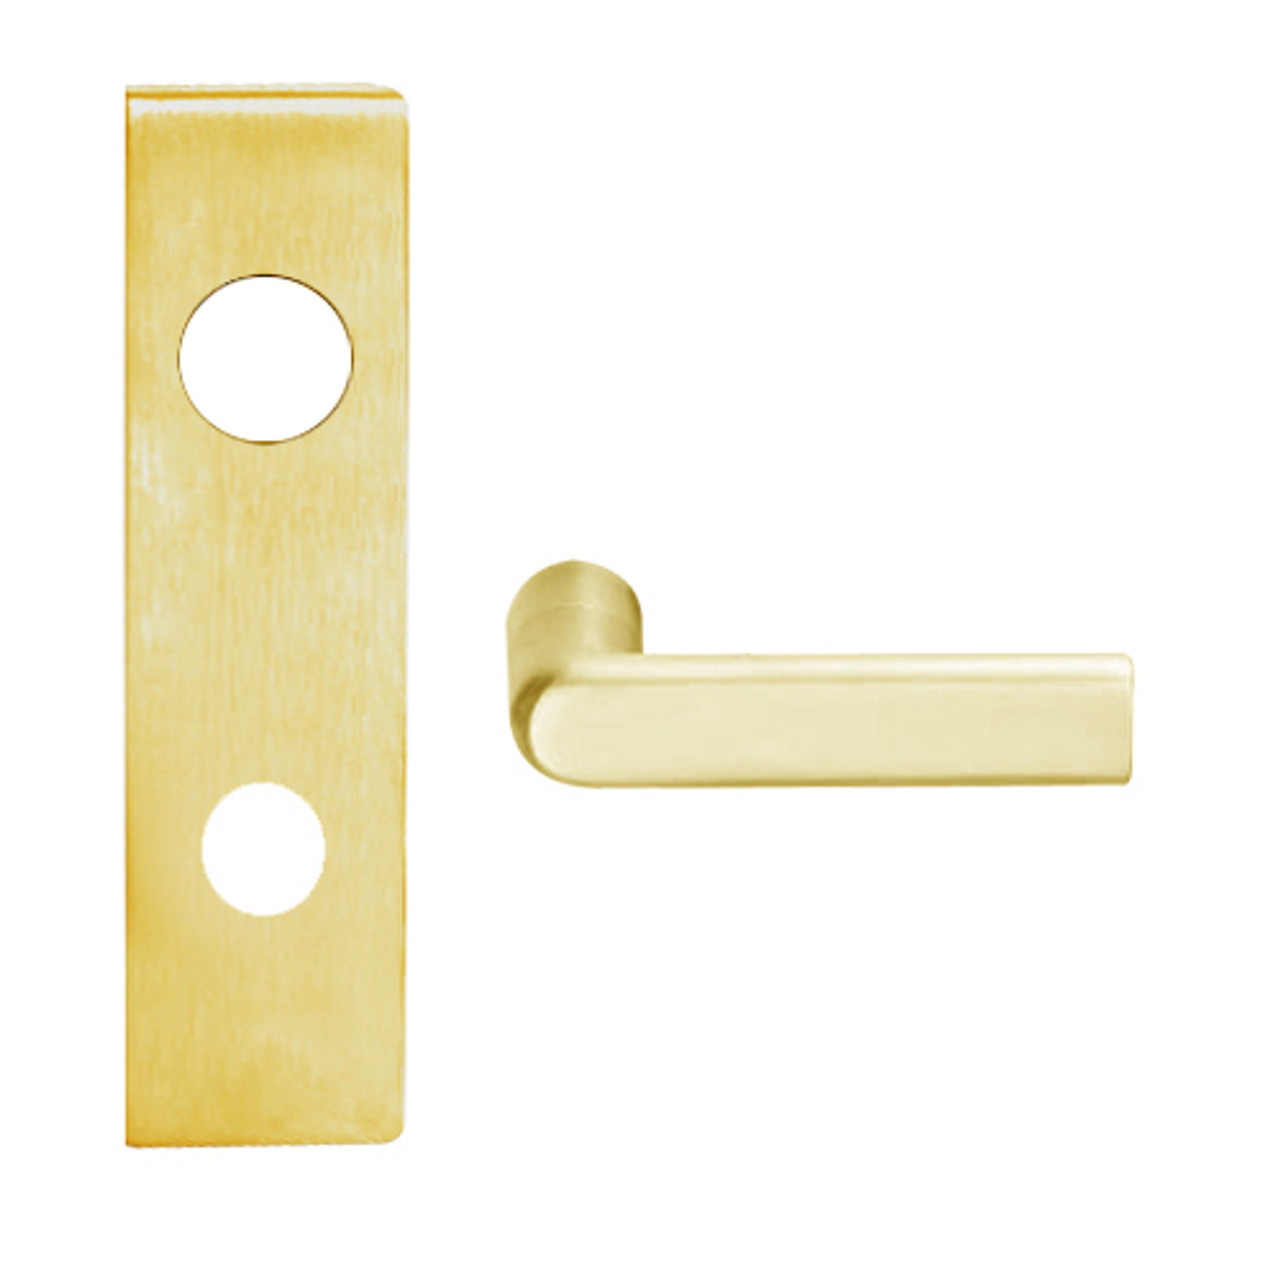 L9480L-01N-605 Schlage L Series Less Cylinder Storeroom with Deadbolt Commercial Mortise Lock with 01 Cast Lever Design in Bright Brass